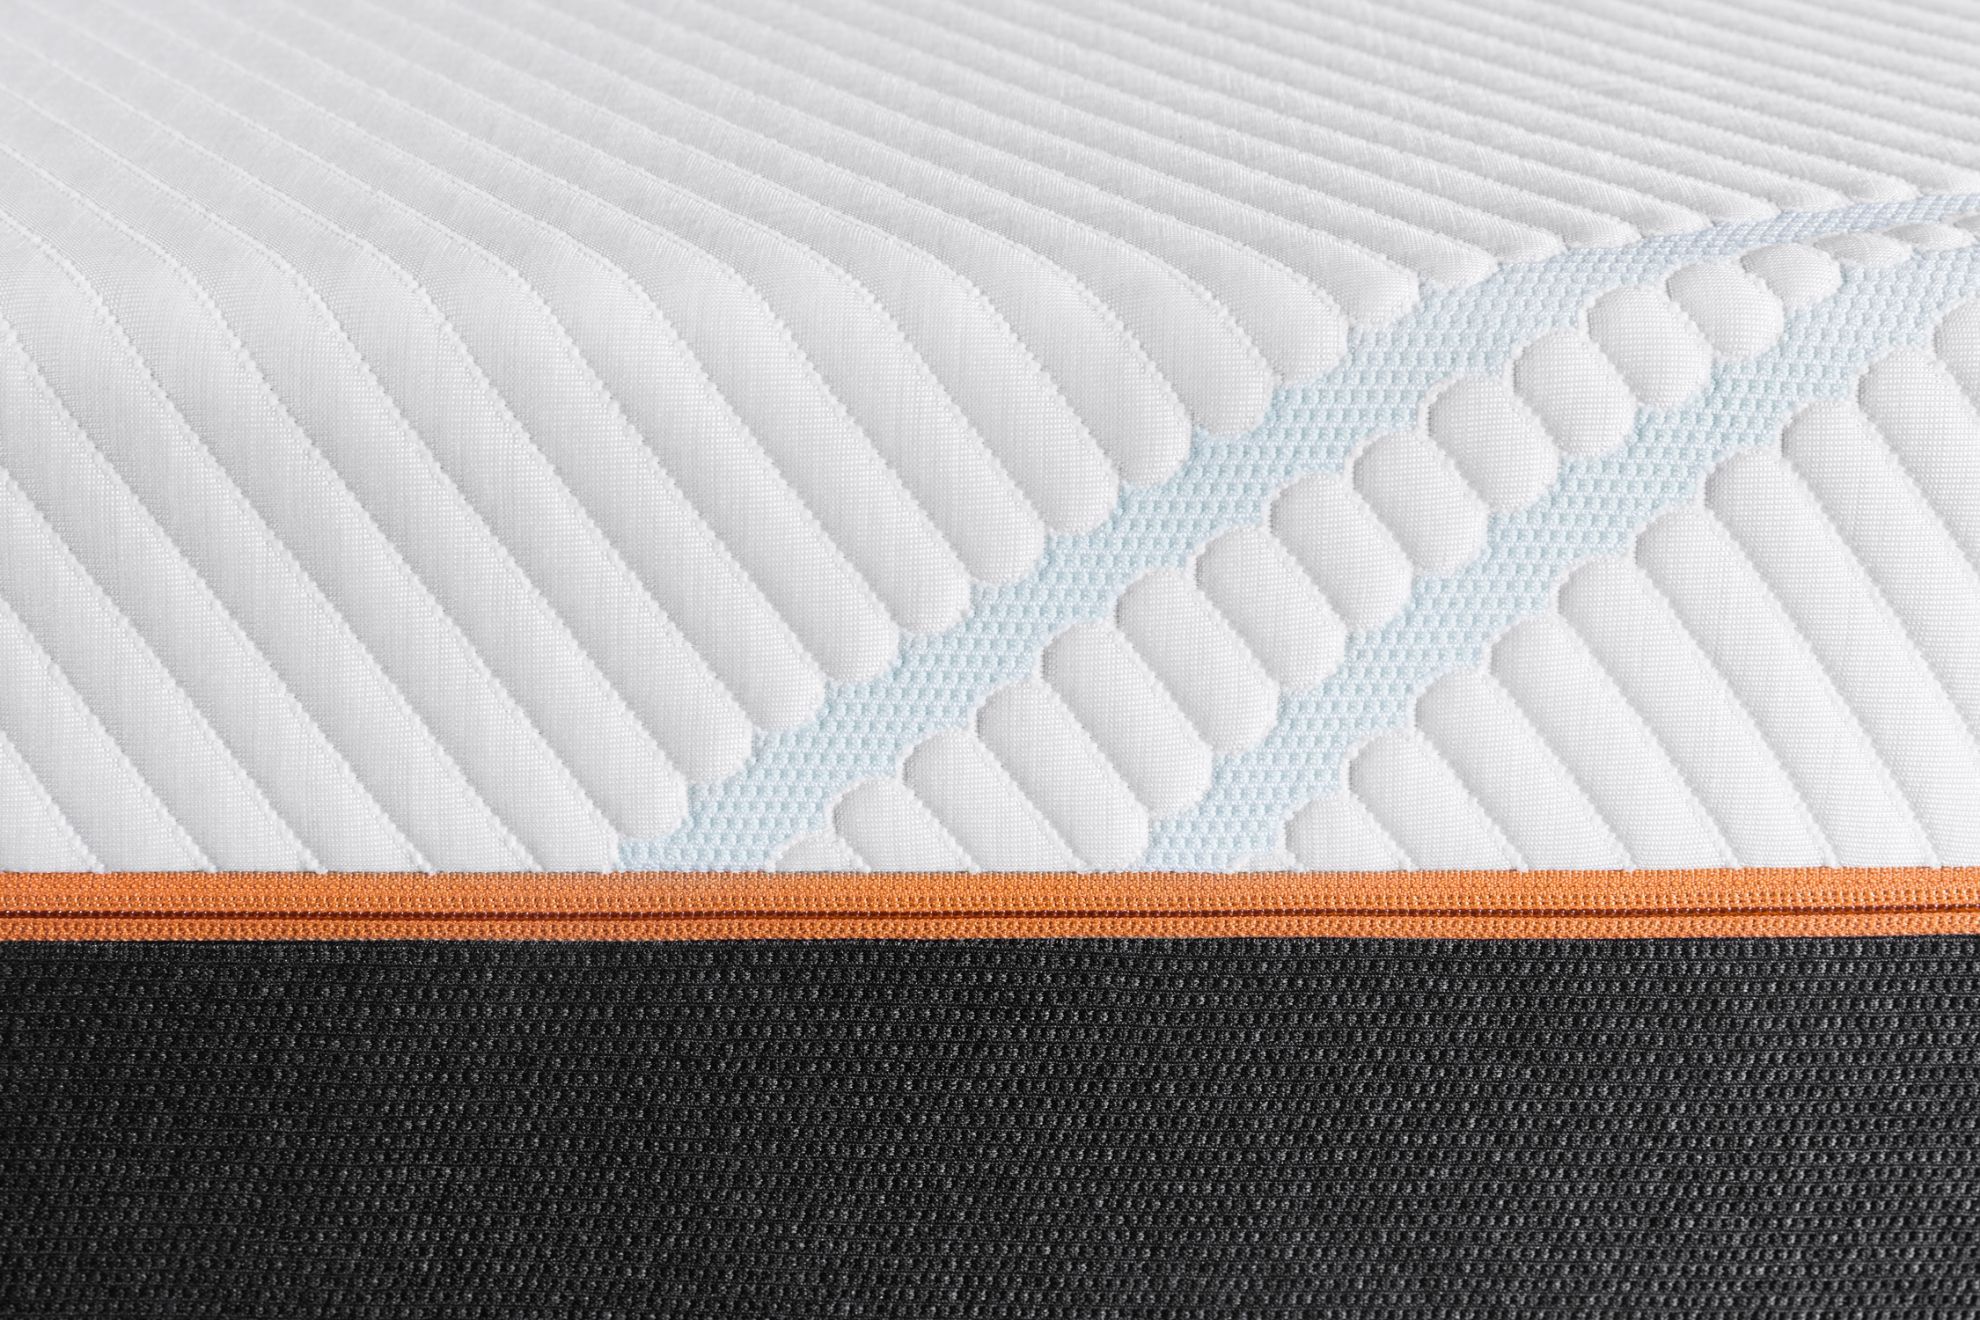 mattresses comparable to pro adapt firm